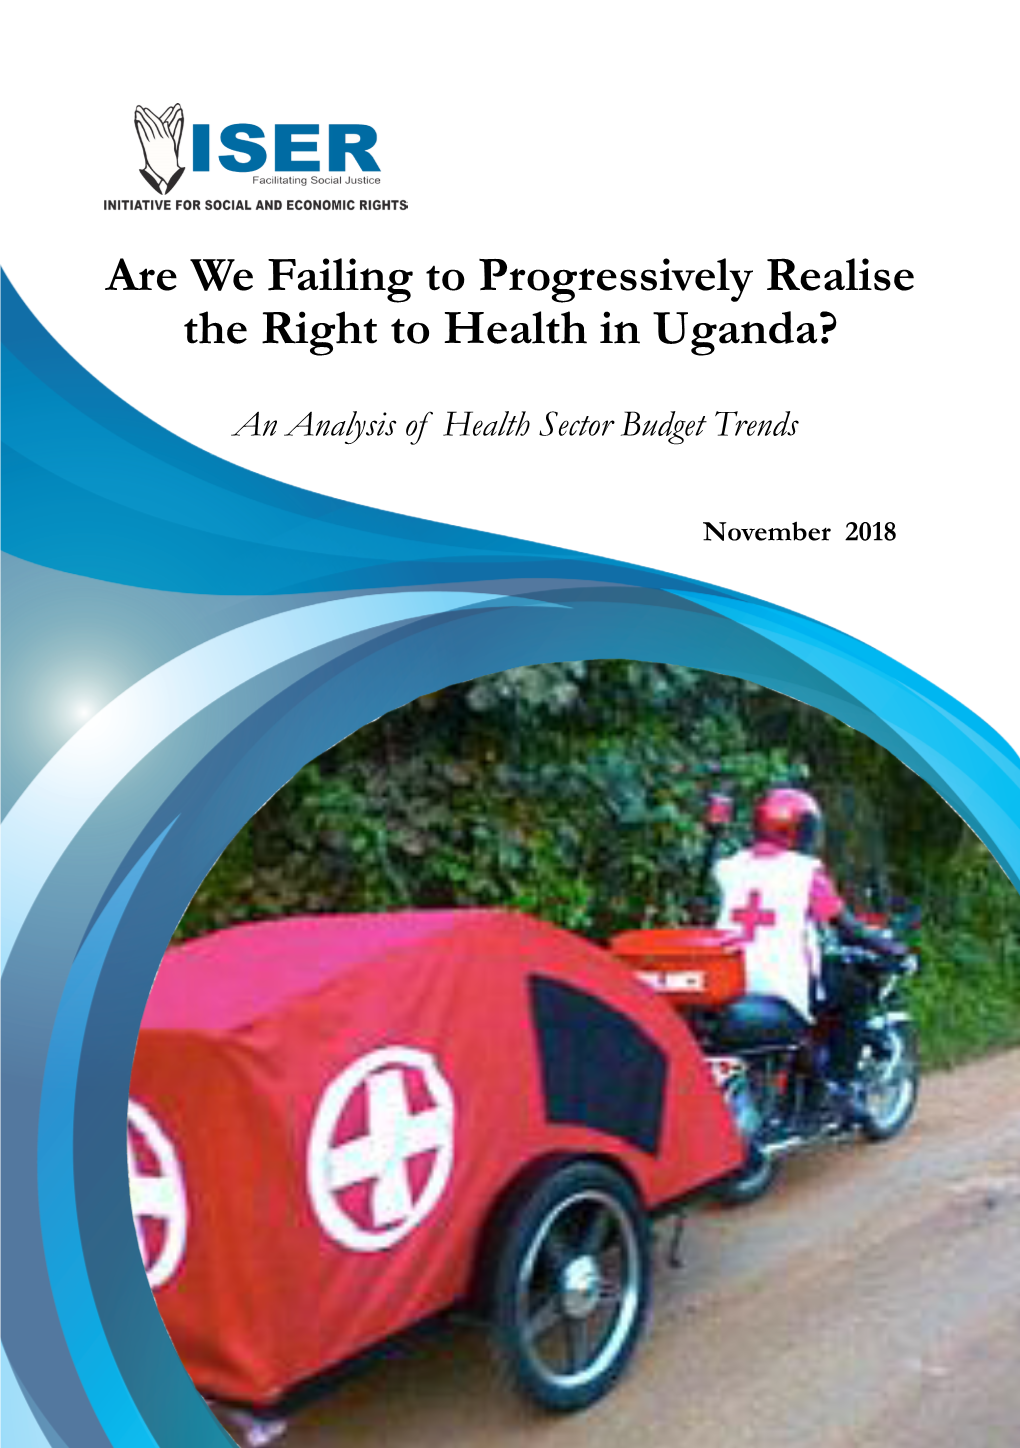 Are We Failing to Progressively Realise the Right to Health in Uganda?